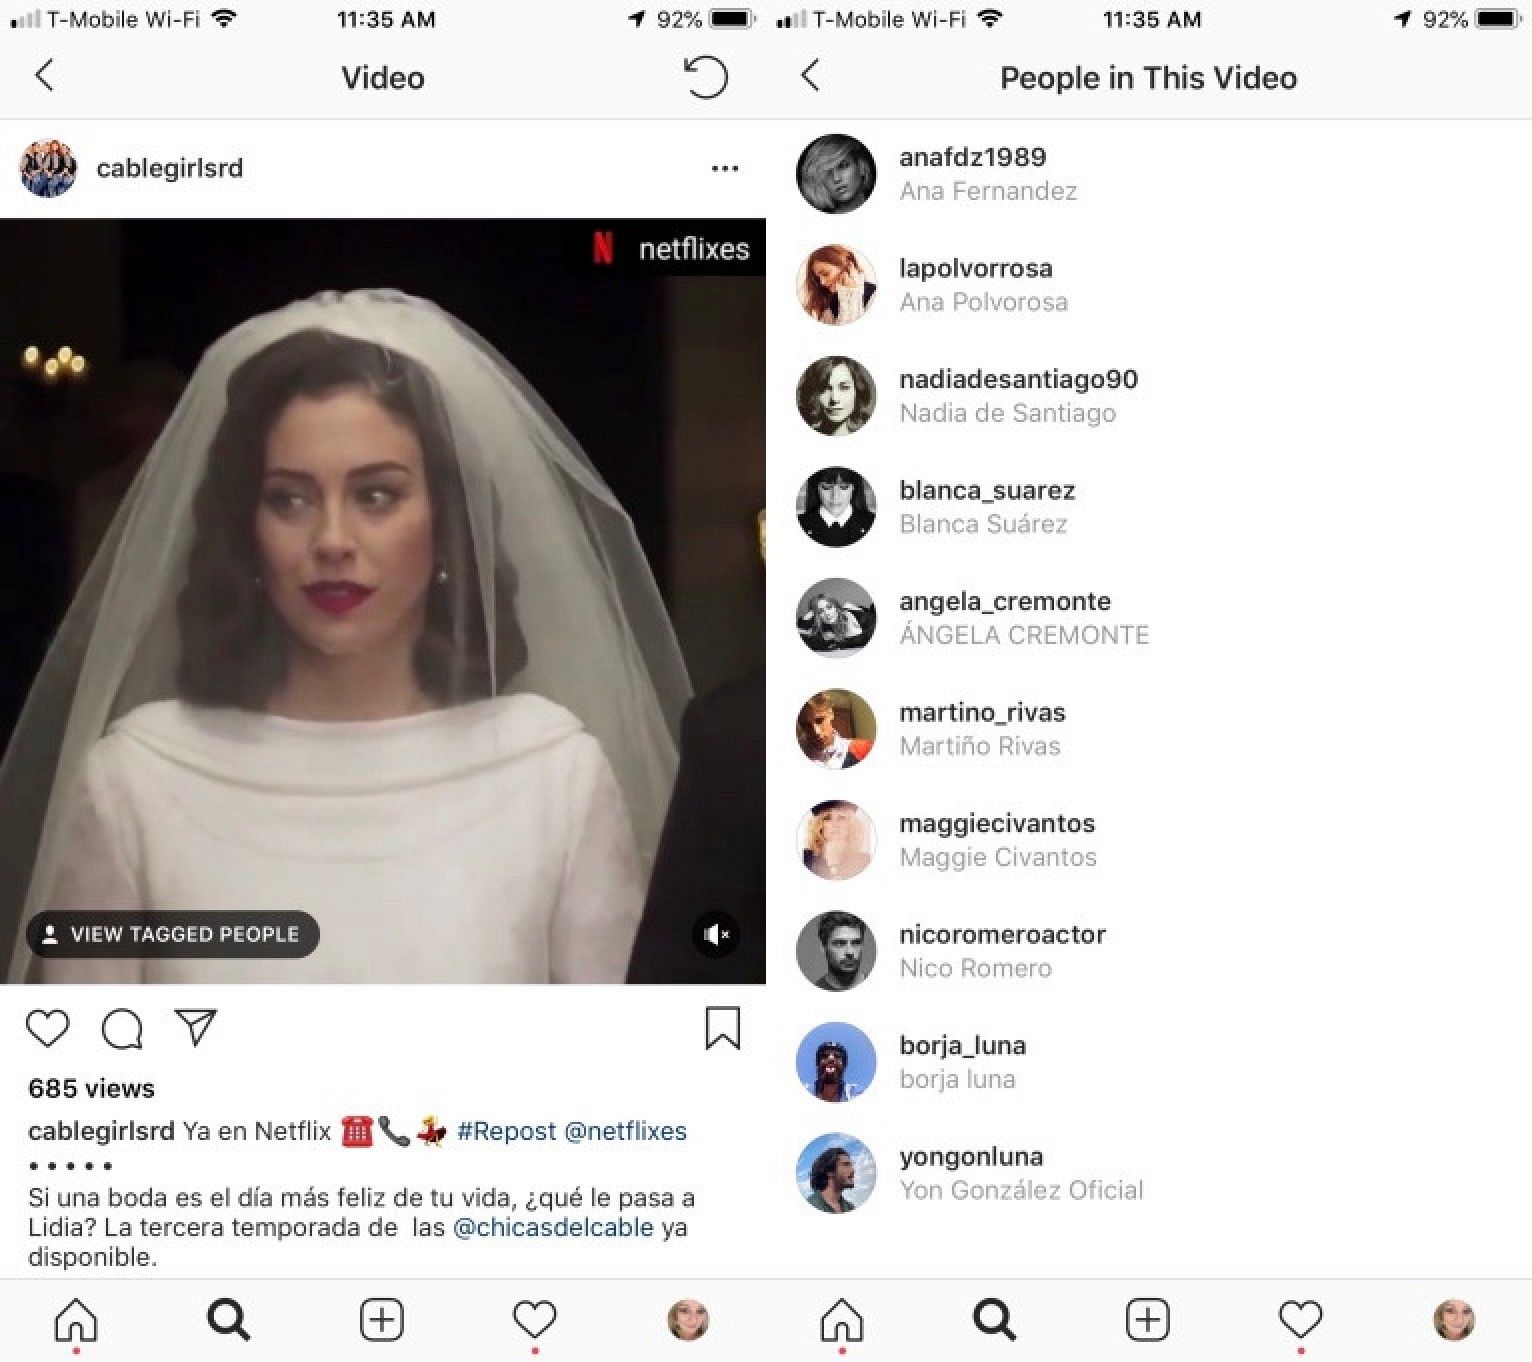 Instagram Will Soon Enable Video Tagging on Its Platform